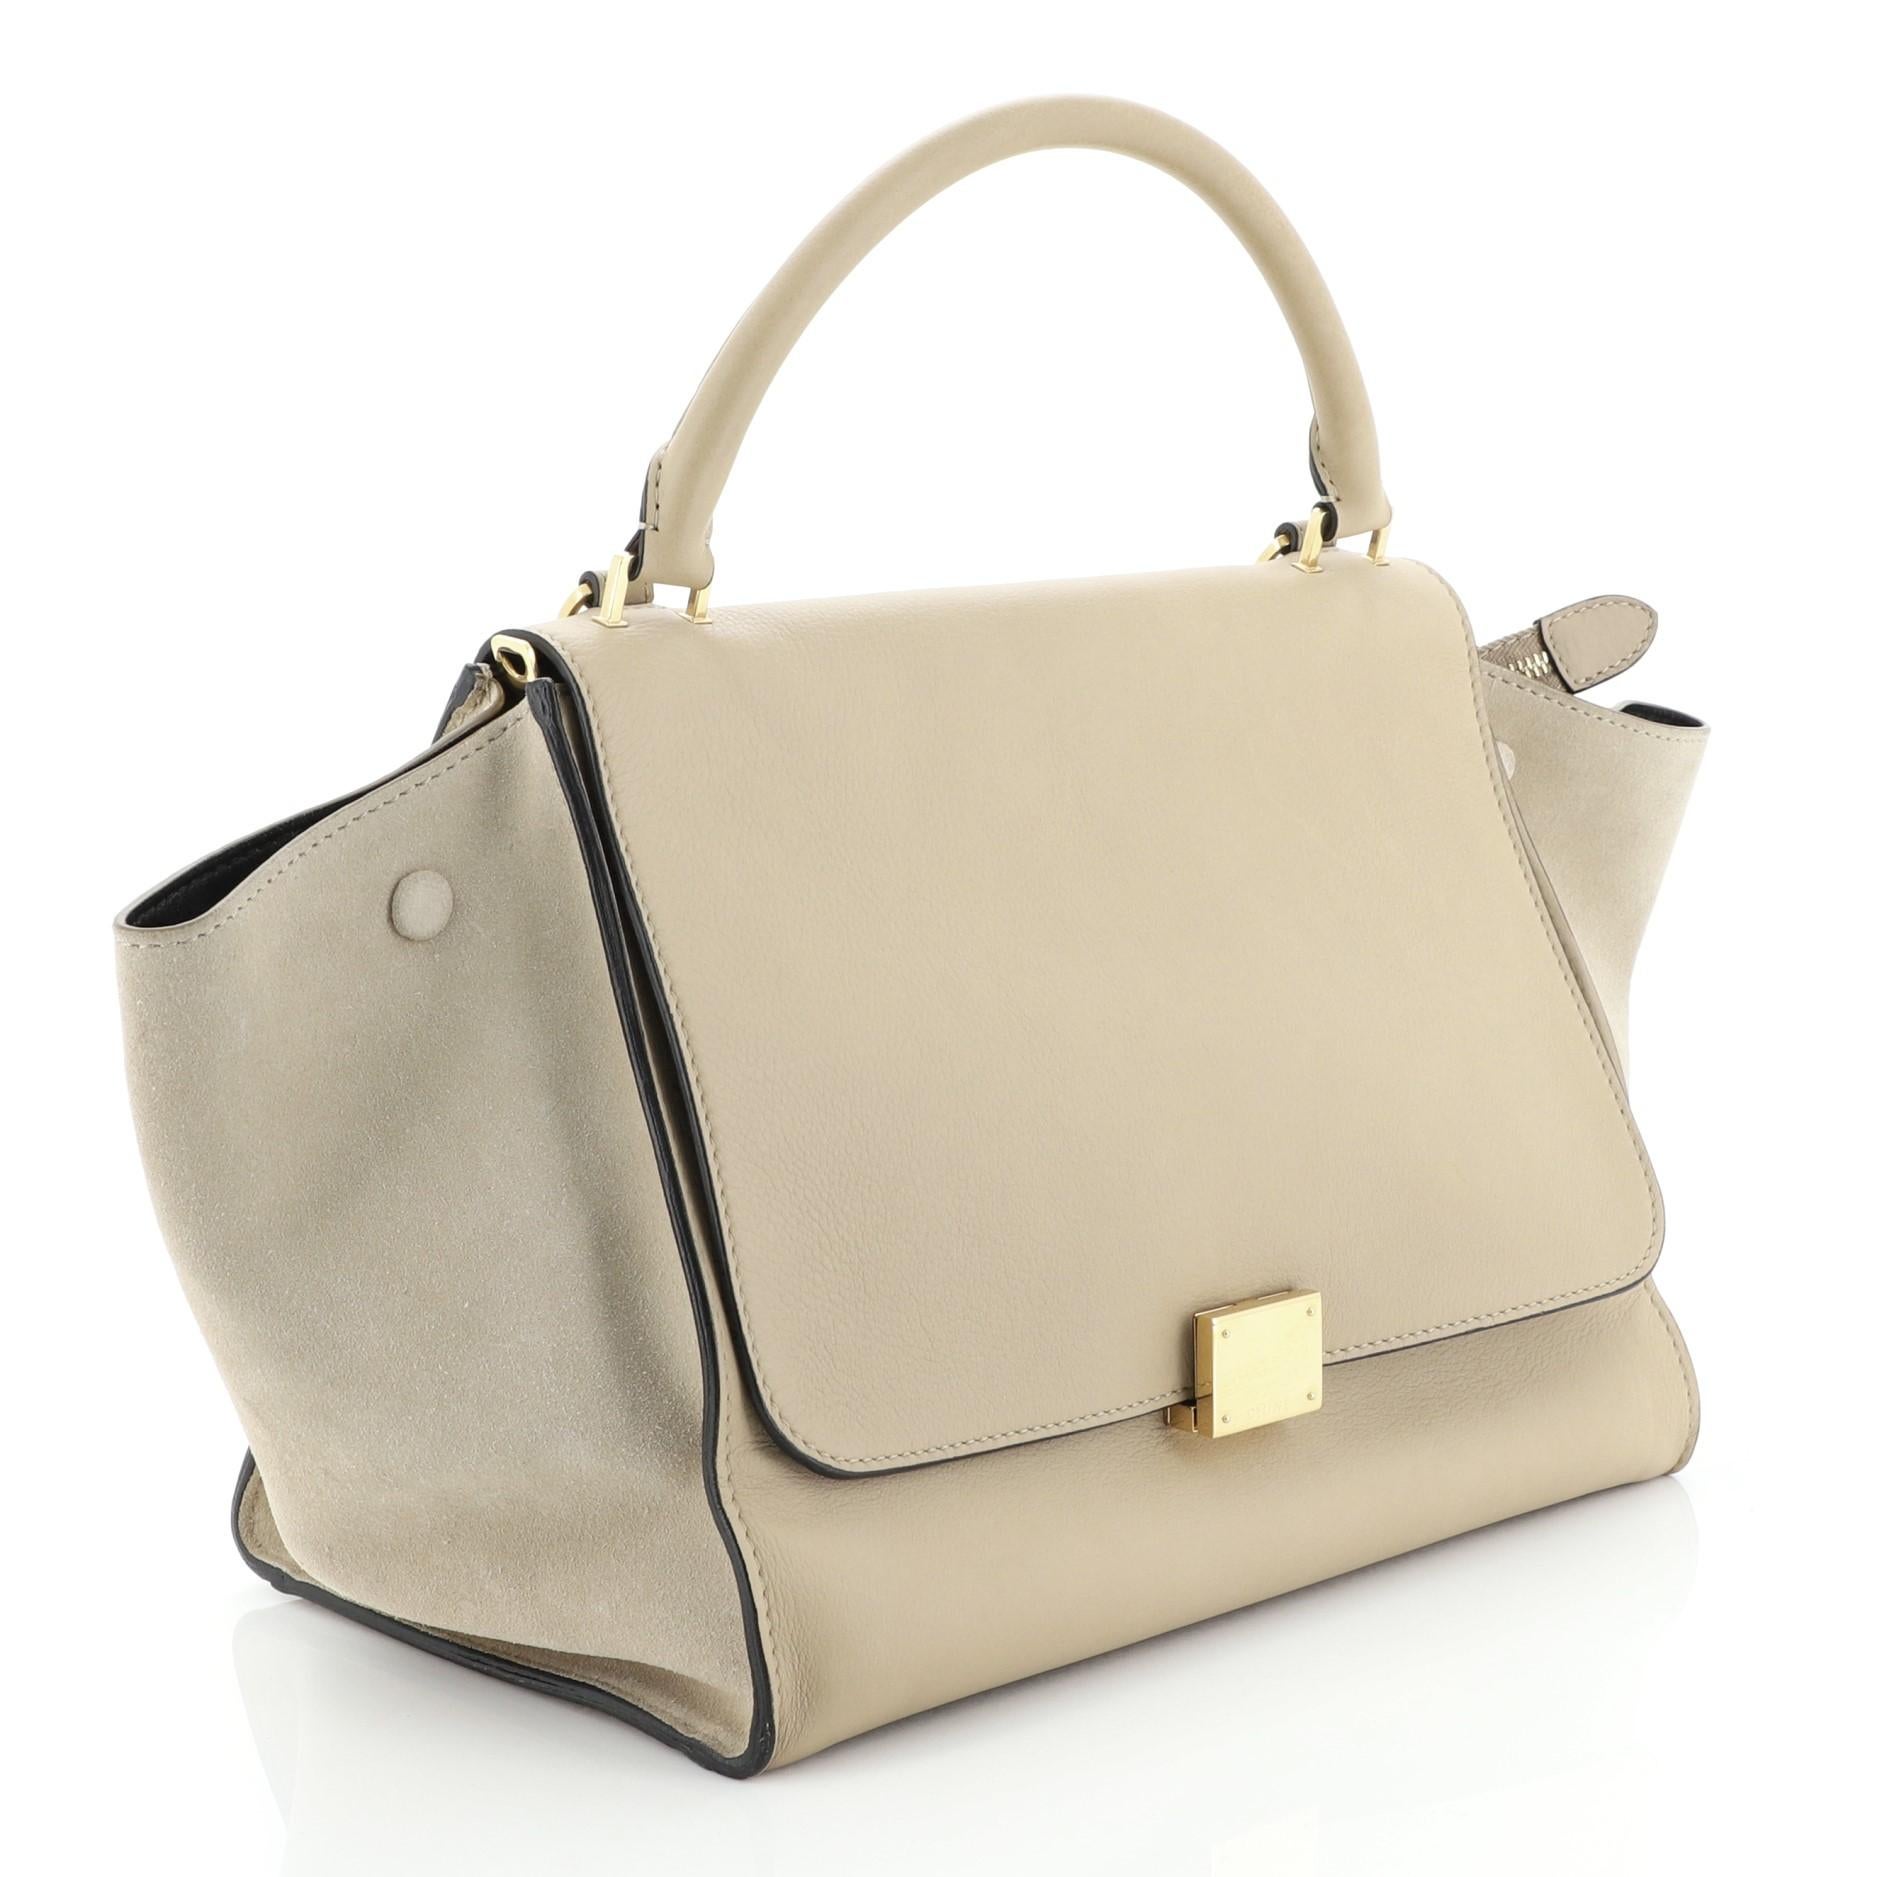 This Celine Trapeze Bag Leather Medium, crafted from neutral leather, features a rolled leather handle, exterior back zip pocket, and gold-tone hardware. Its square flip-lock and zip closure opens to a black leather interior with slip pockets.